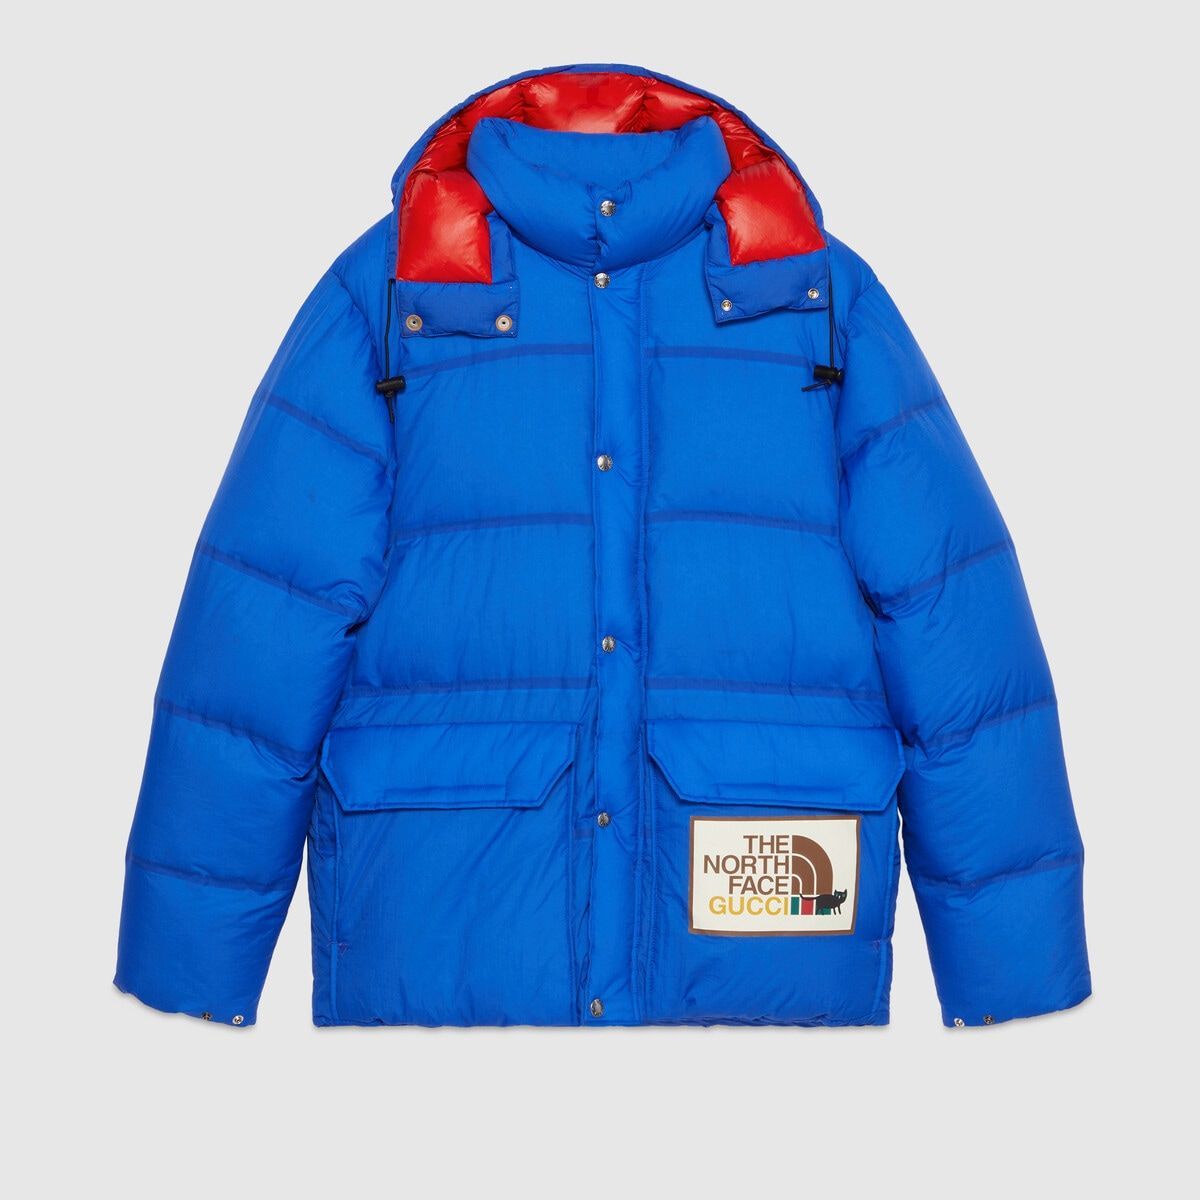 The North Face x Gucci down jacket